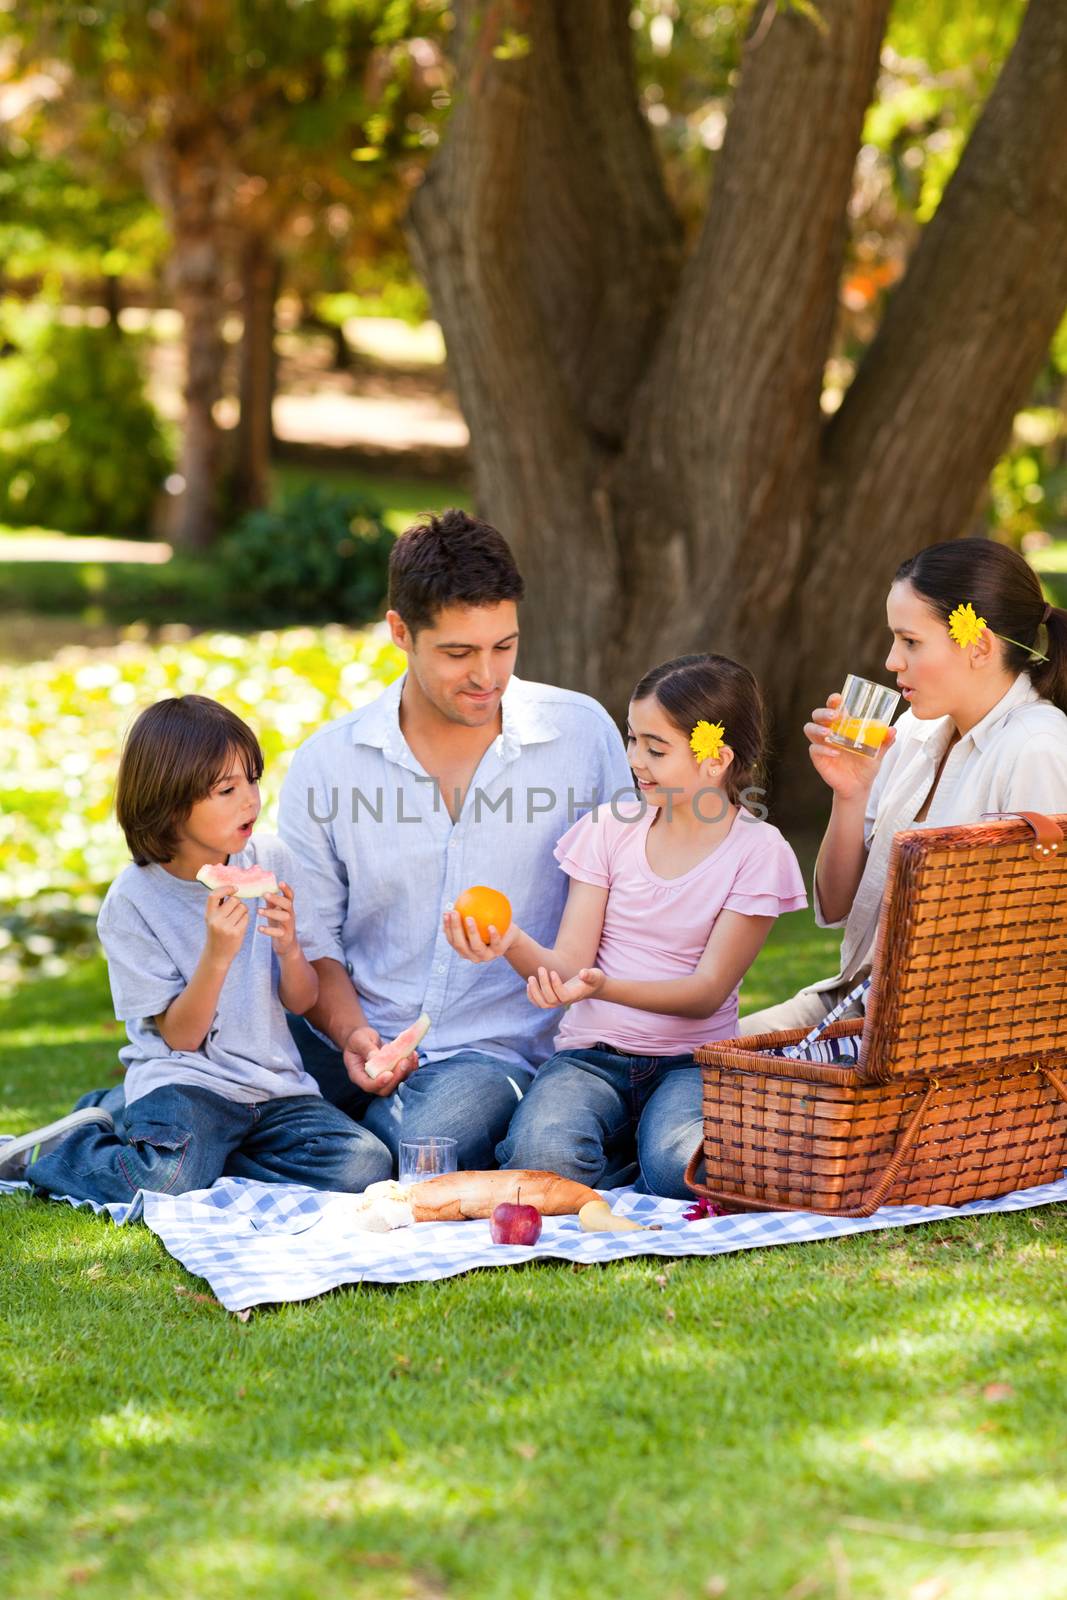 Lovely family picnicking in the park by Wavebreakmedia